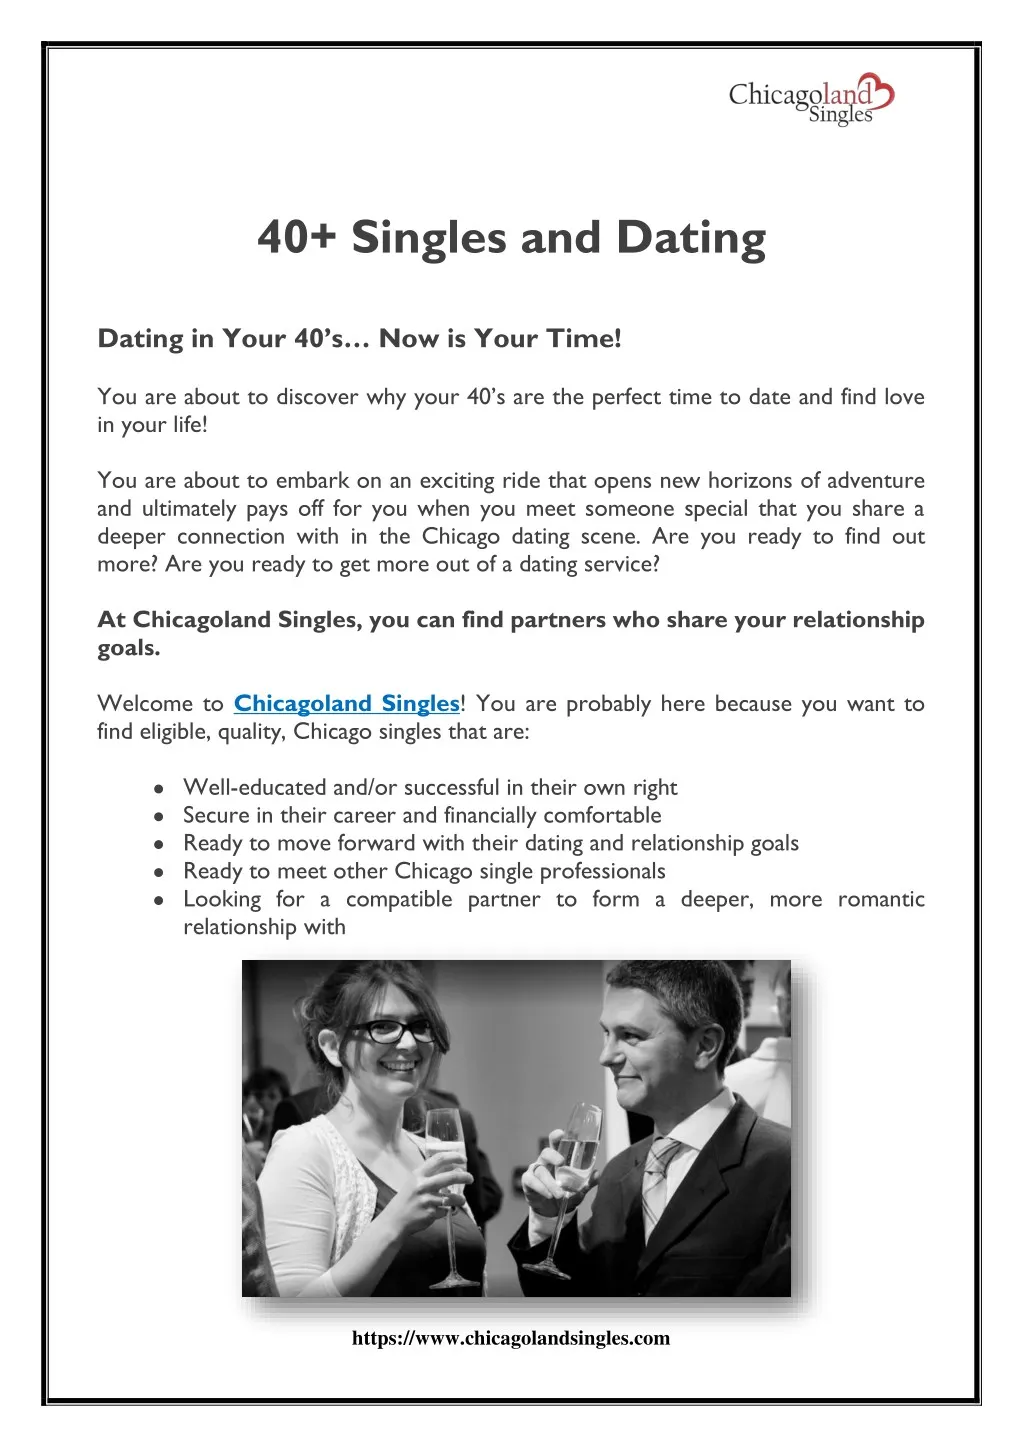 40 singles and dating dating in your